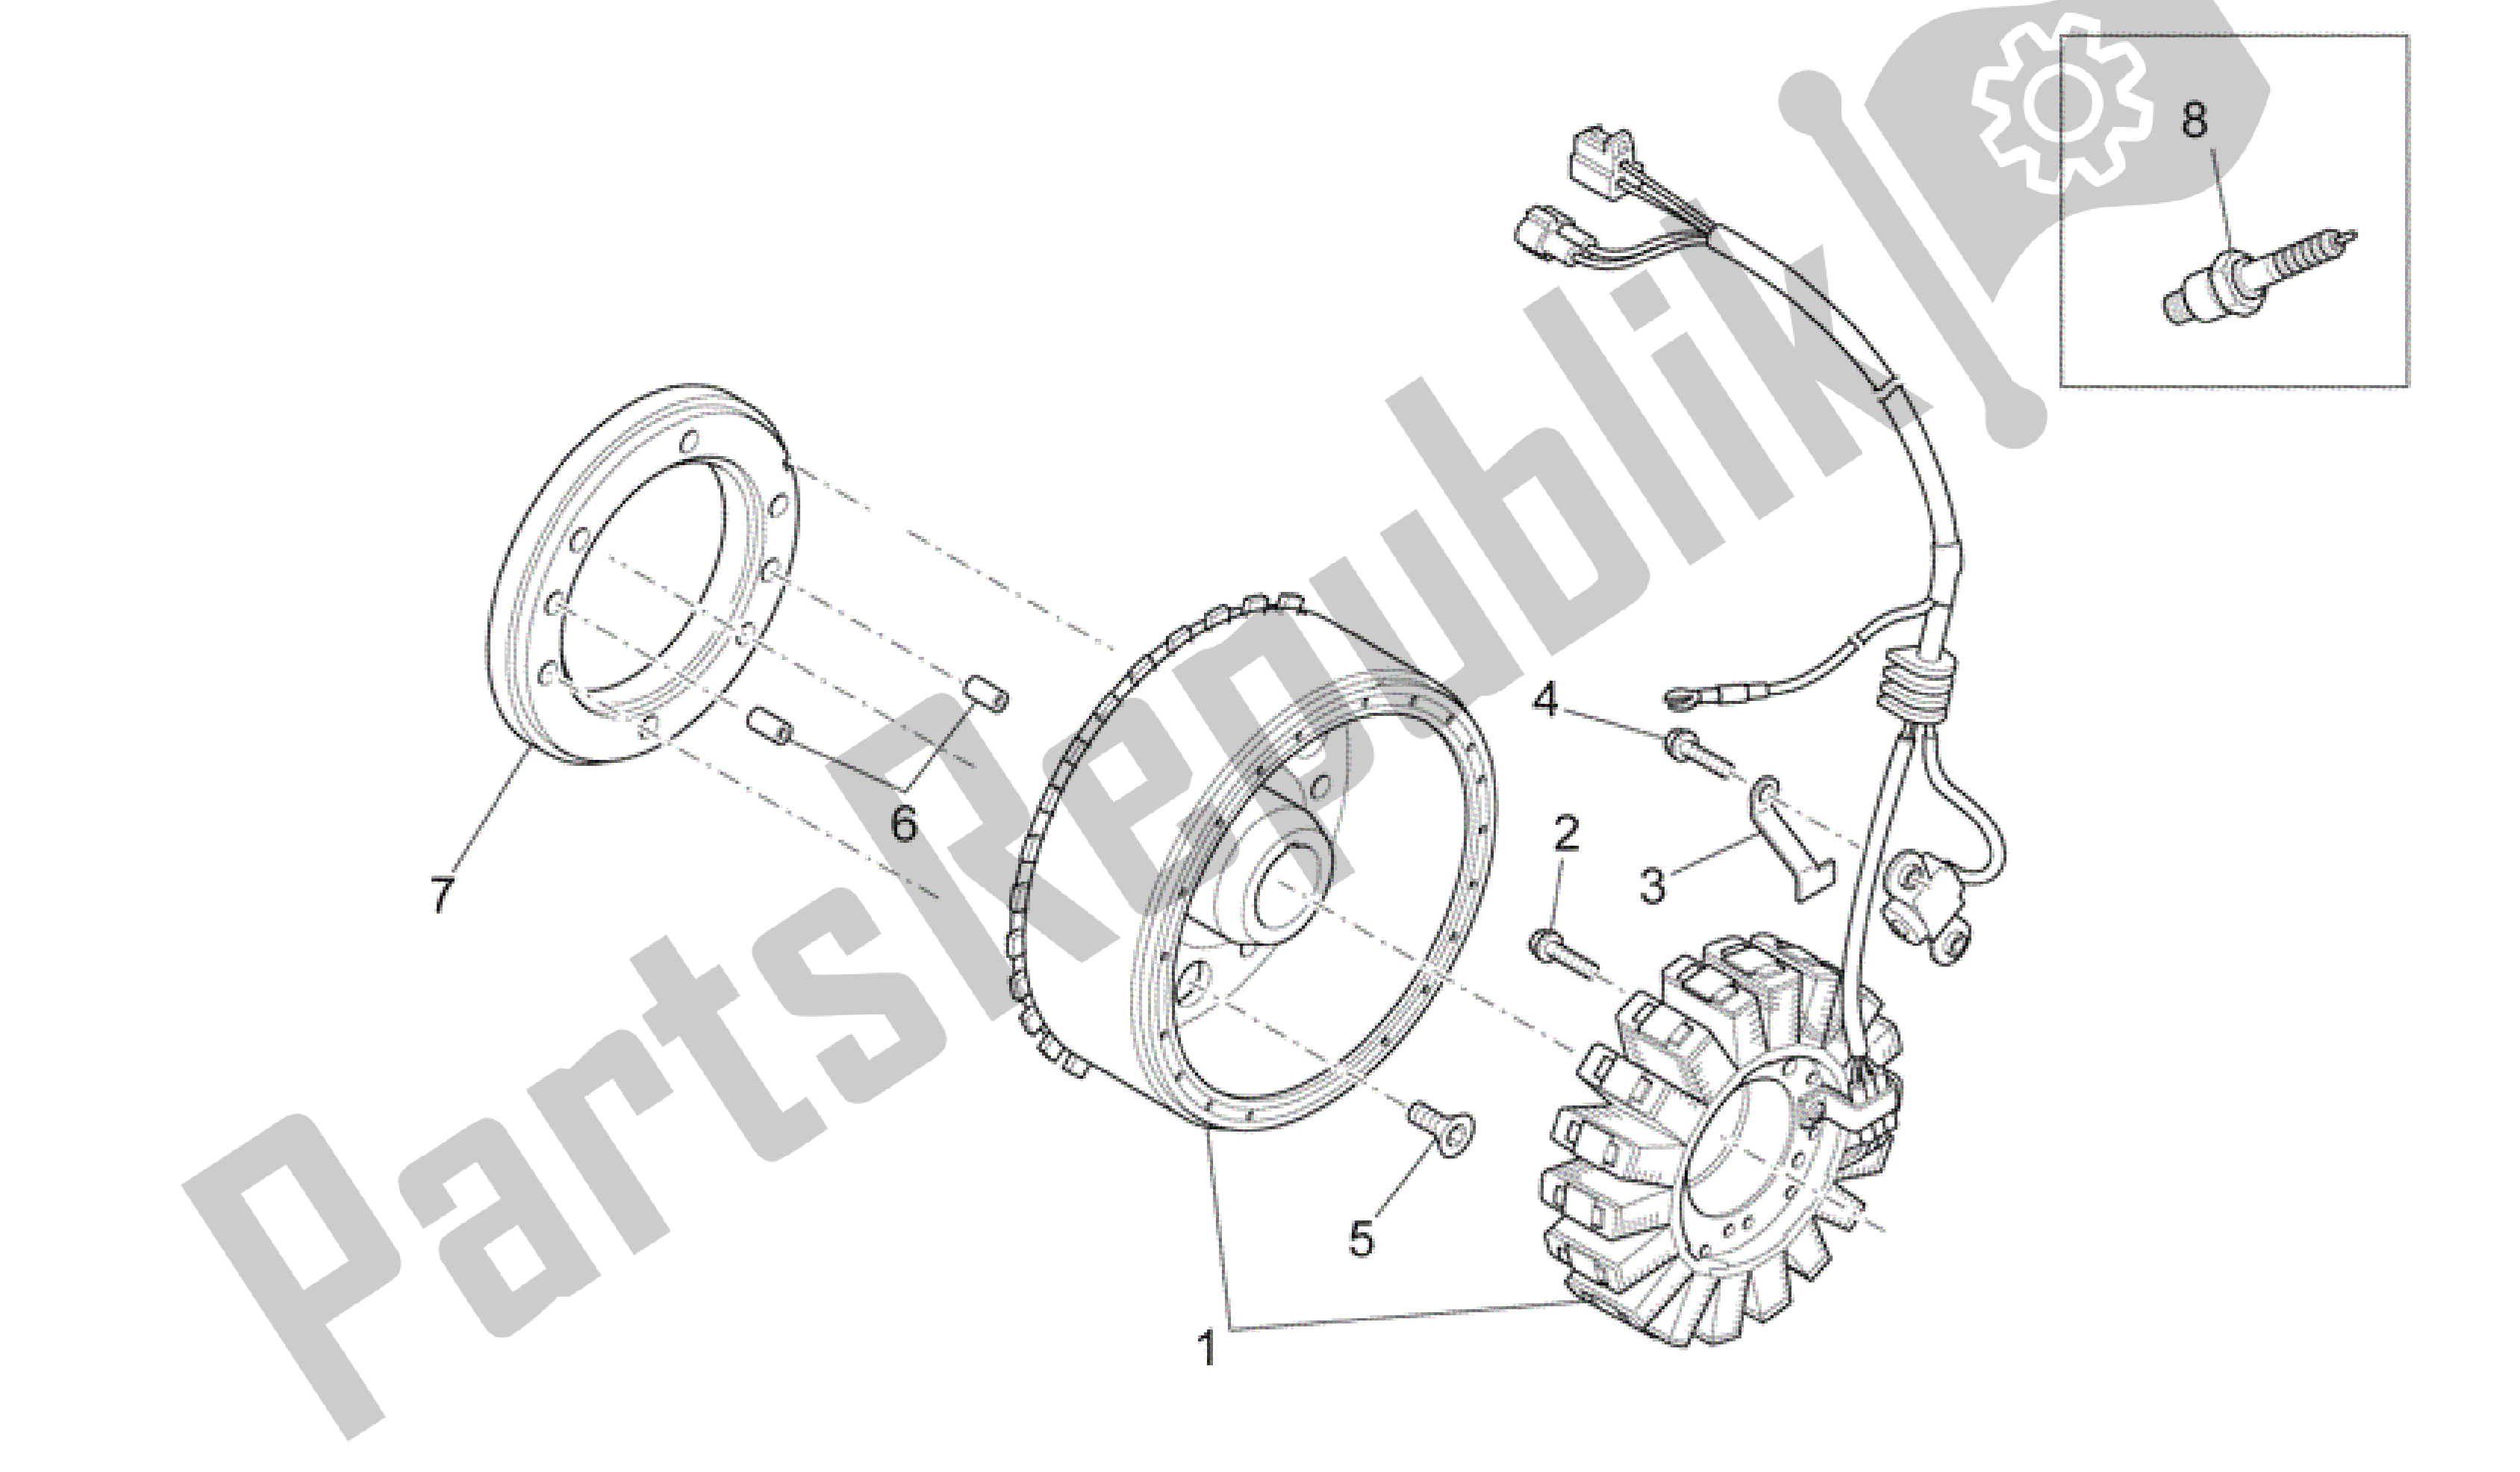 All parts for the Ignition Unit of the Aprilia RXV 550 2009 - 2011